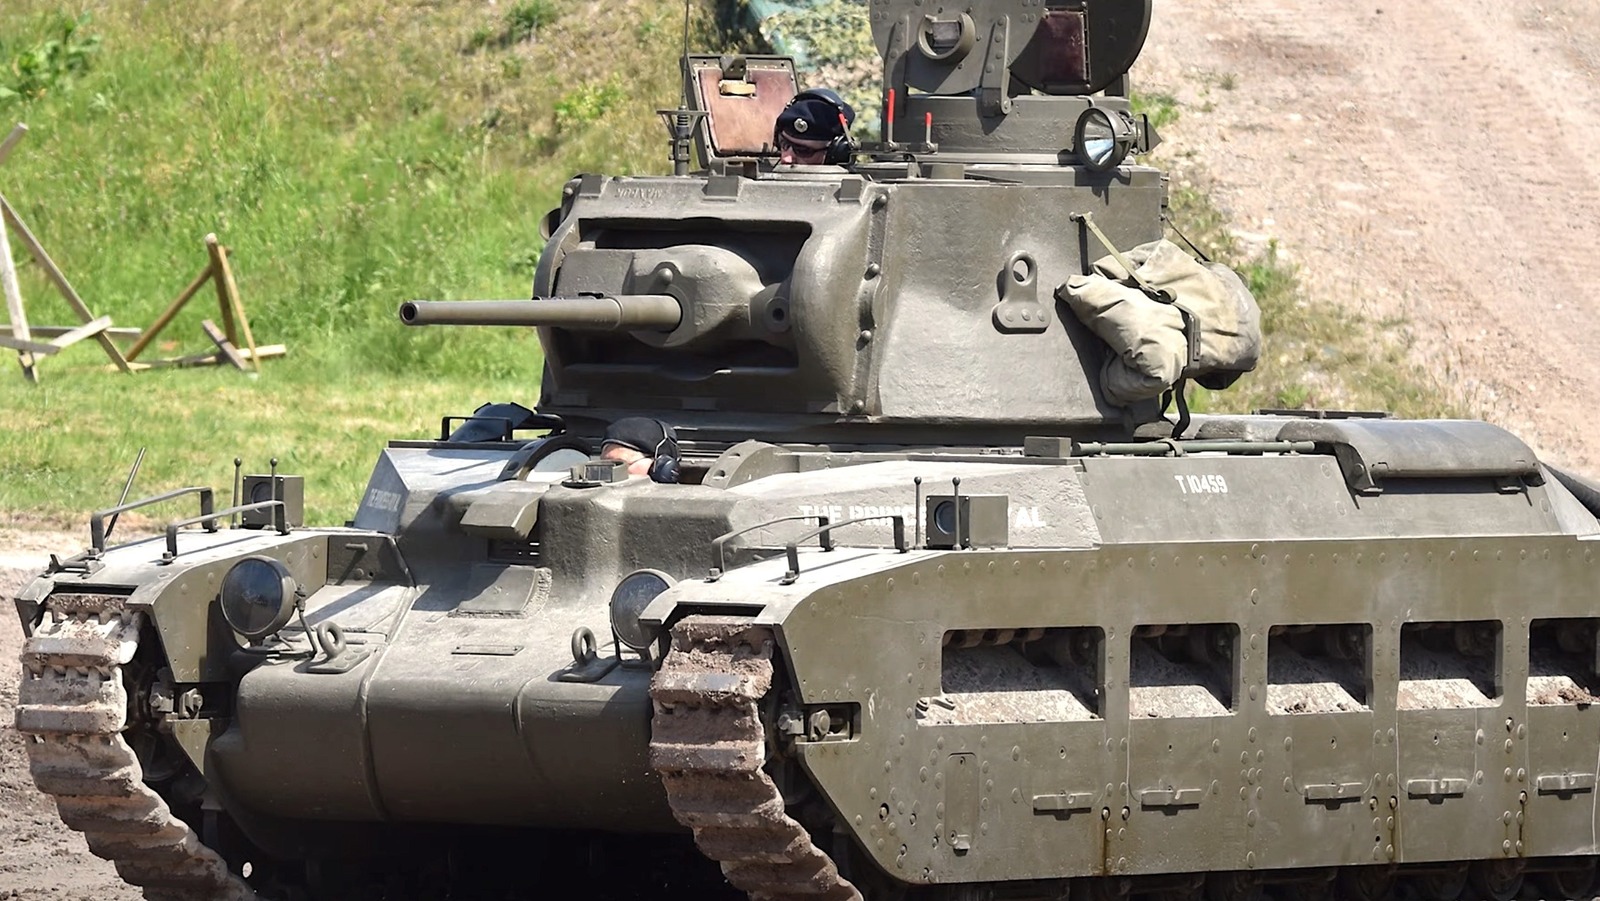 How The Matilda II Tank Earned The Nickname 'Queen Of The Desert'